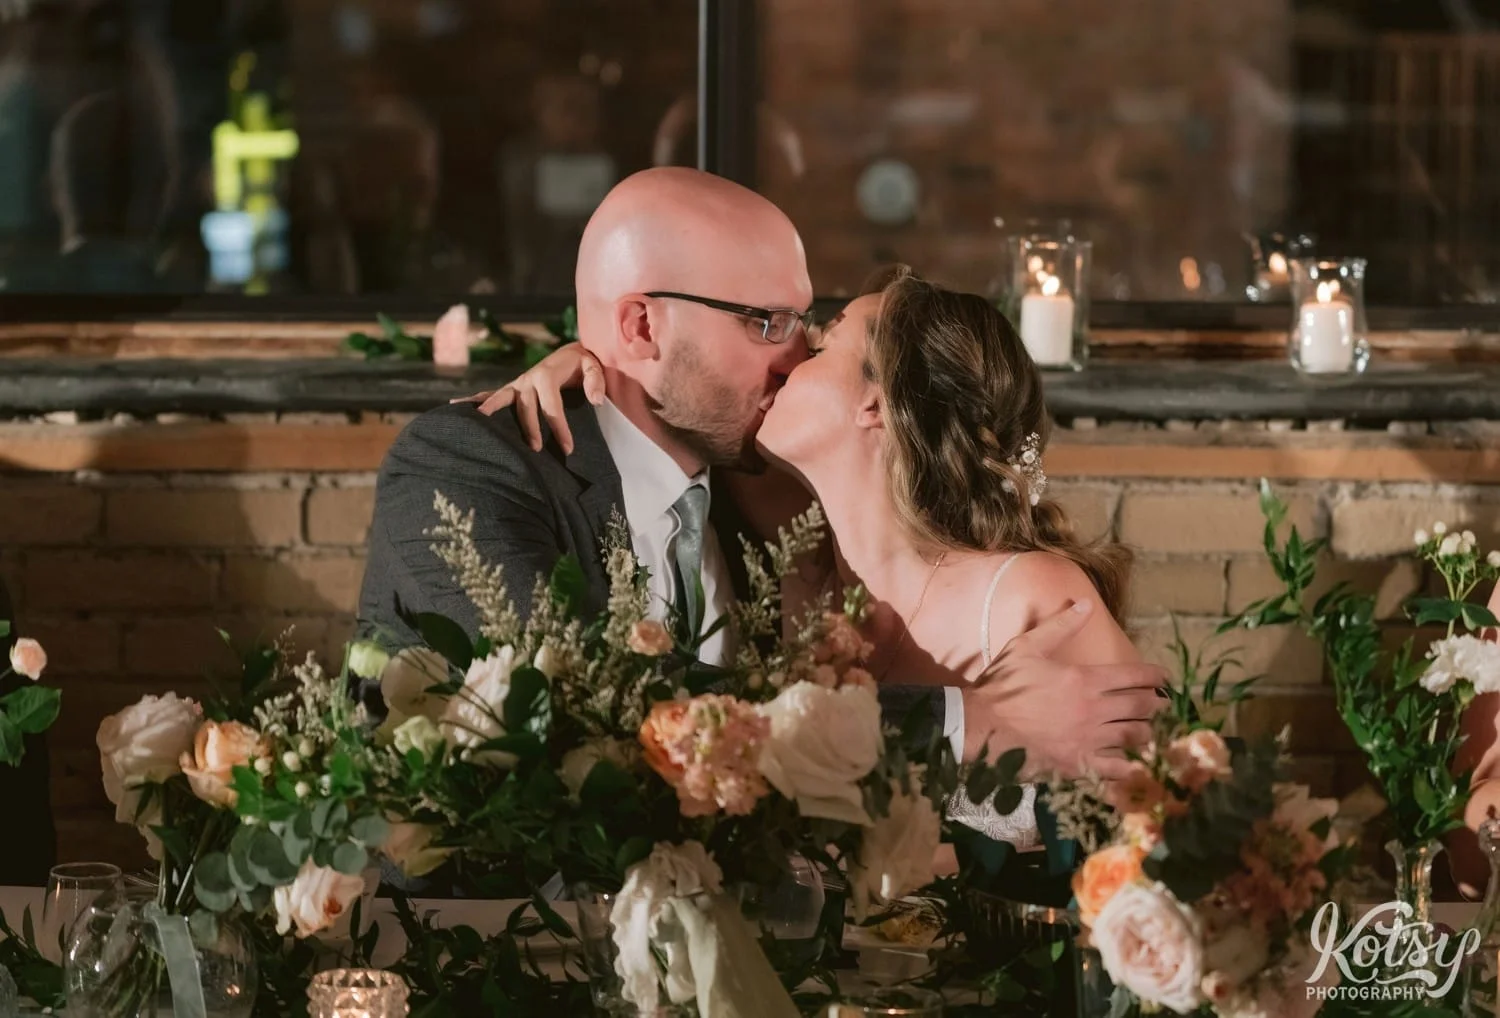 A bride and groom enjoy a kiss while sat at a dinner table behind a large setup of flower bouquets during their Second Floor Events wedding reception in Toronto, Canada.